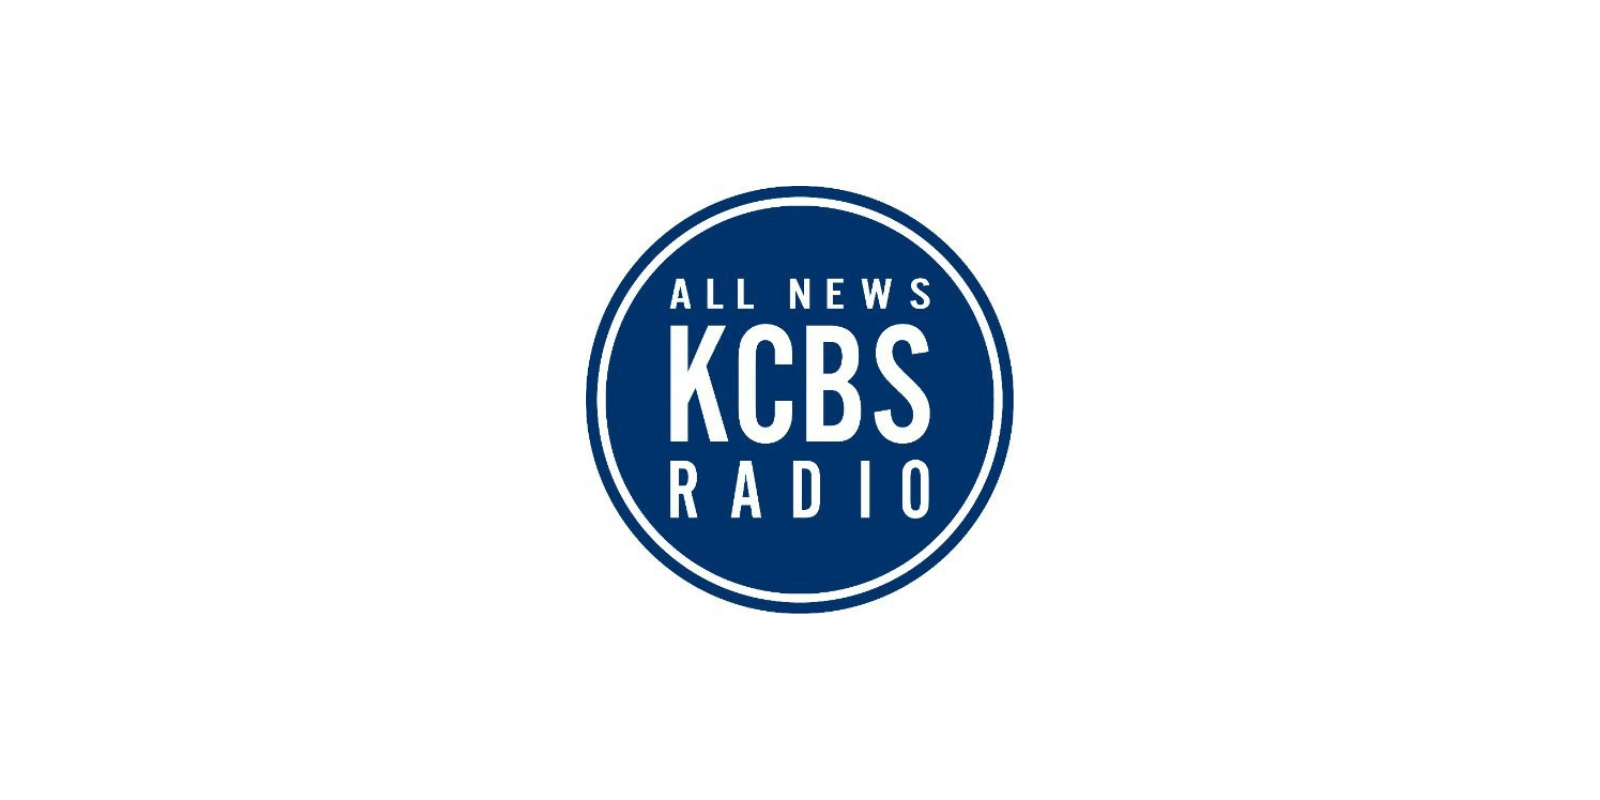 The logo of KCBS Radio, with white text and a dark blue background.